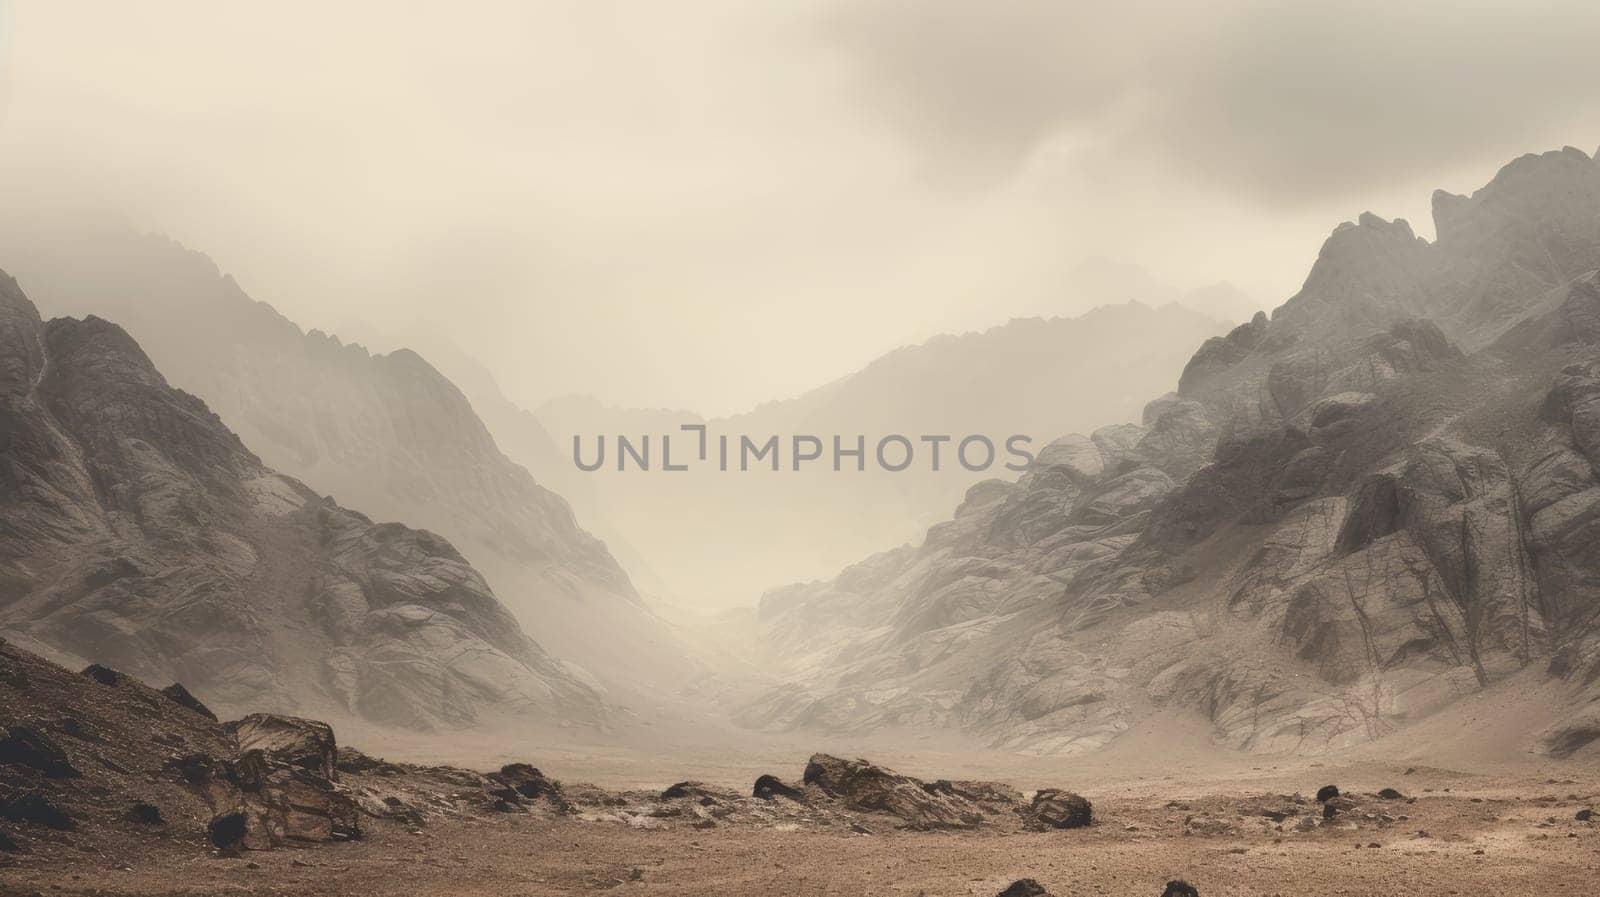 Landscape of mountains and rocks in the desert. by Alla_Yurtayeva